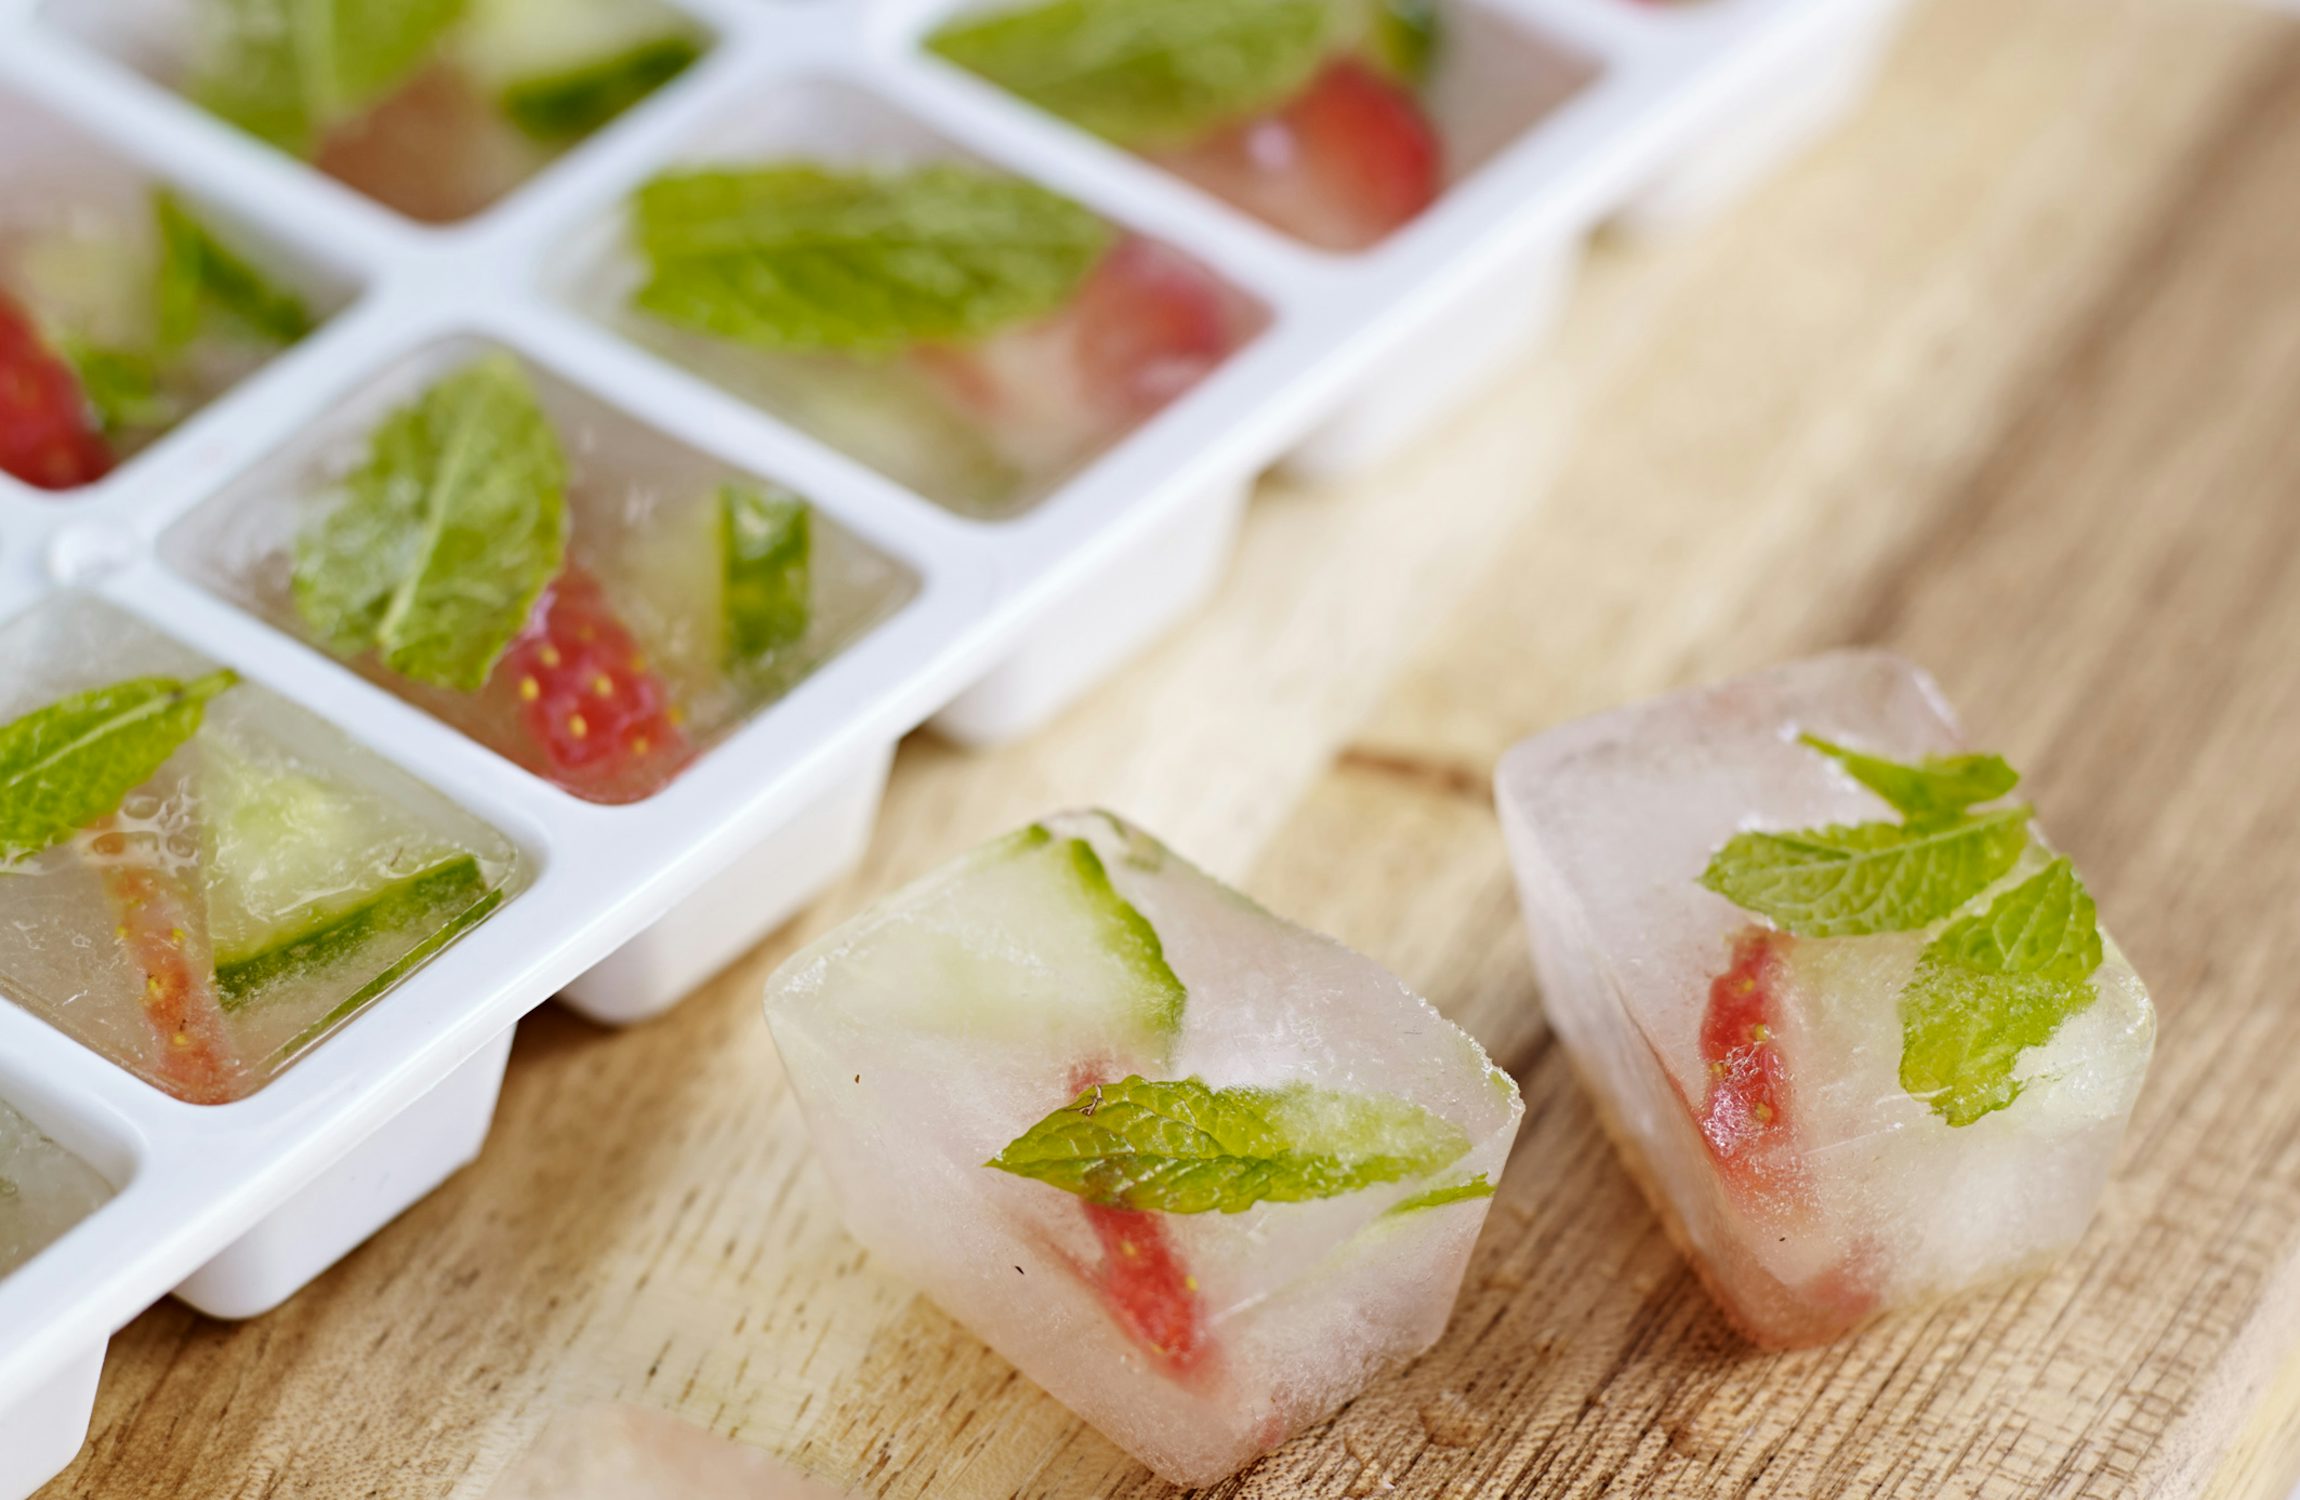 Strawberry & Mint Ice Cubes